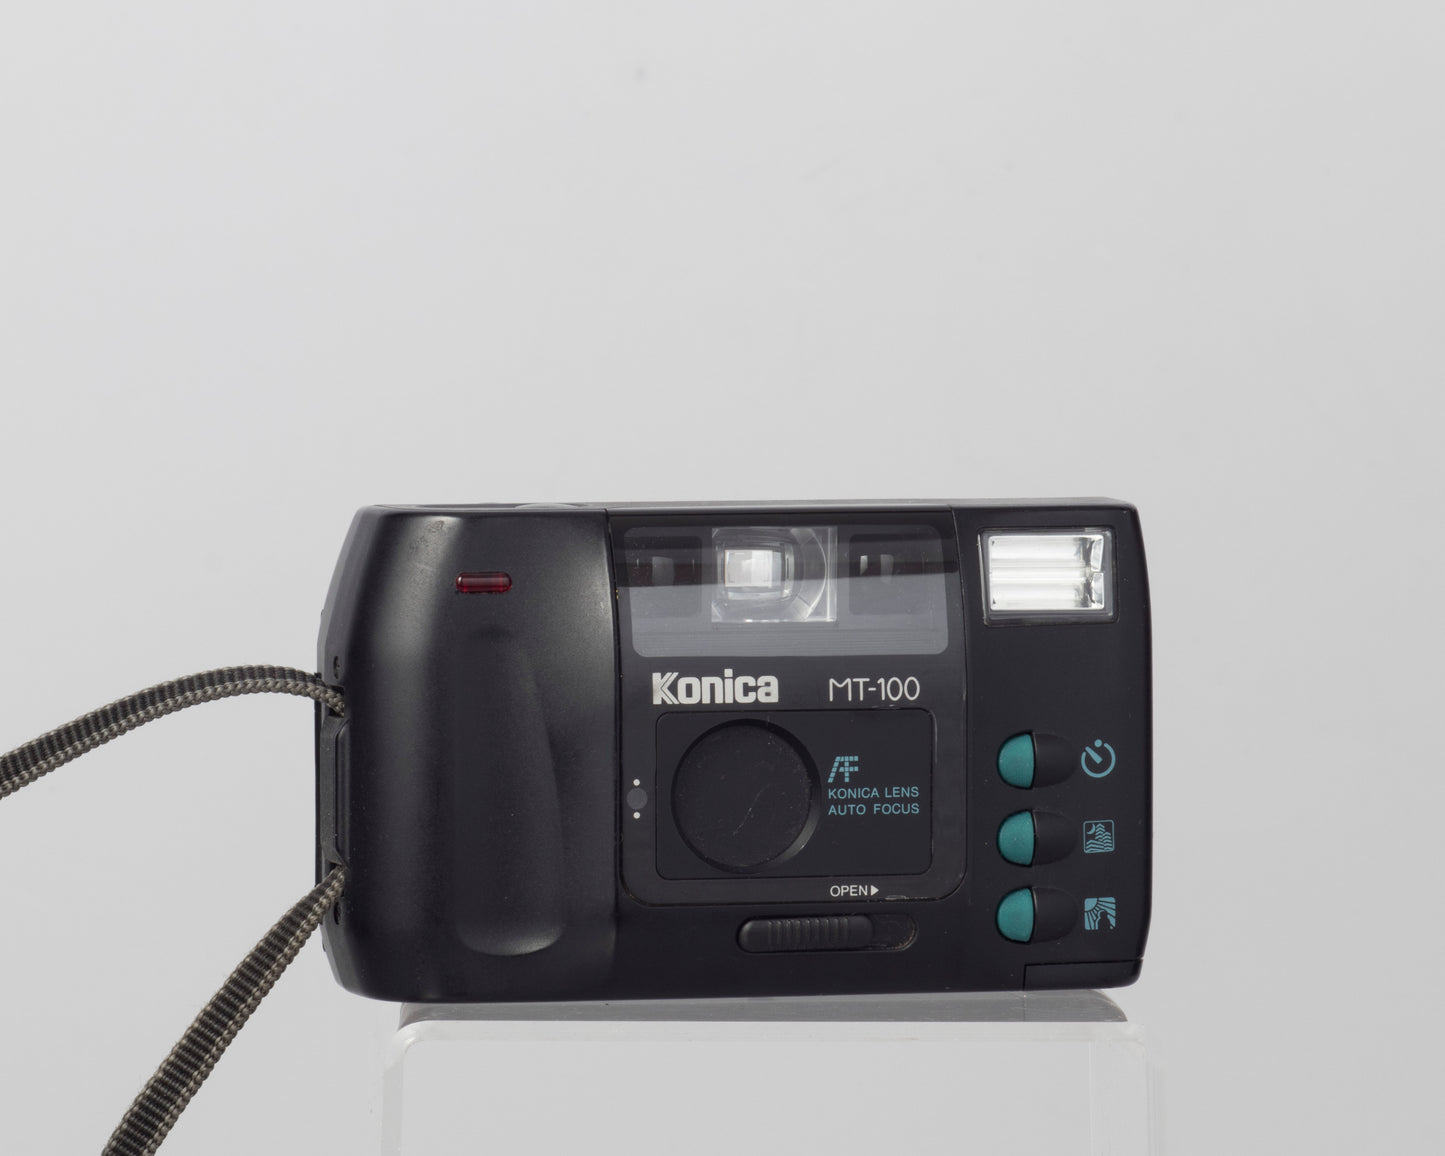 The Konica MT-100 is a 35mm point-and-shoot camera from 1989 (shown switched off)